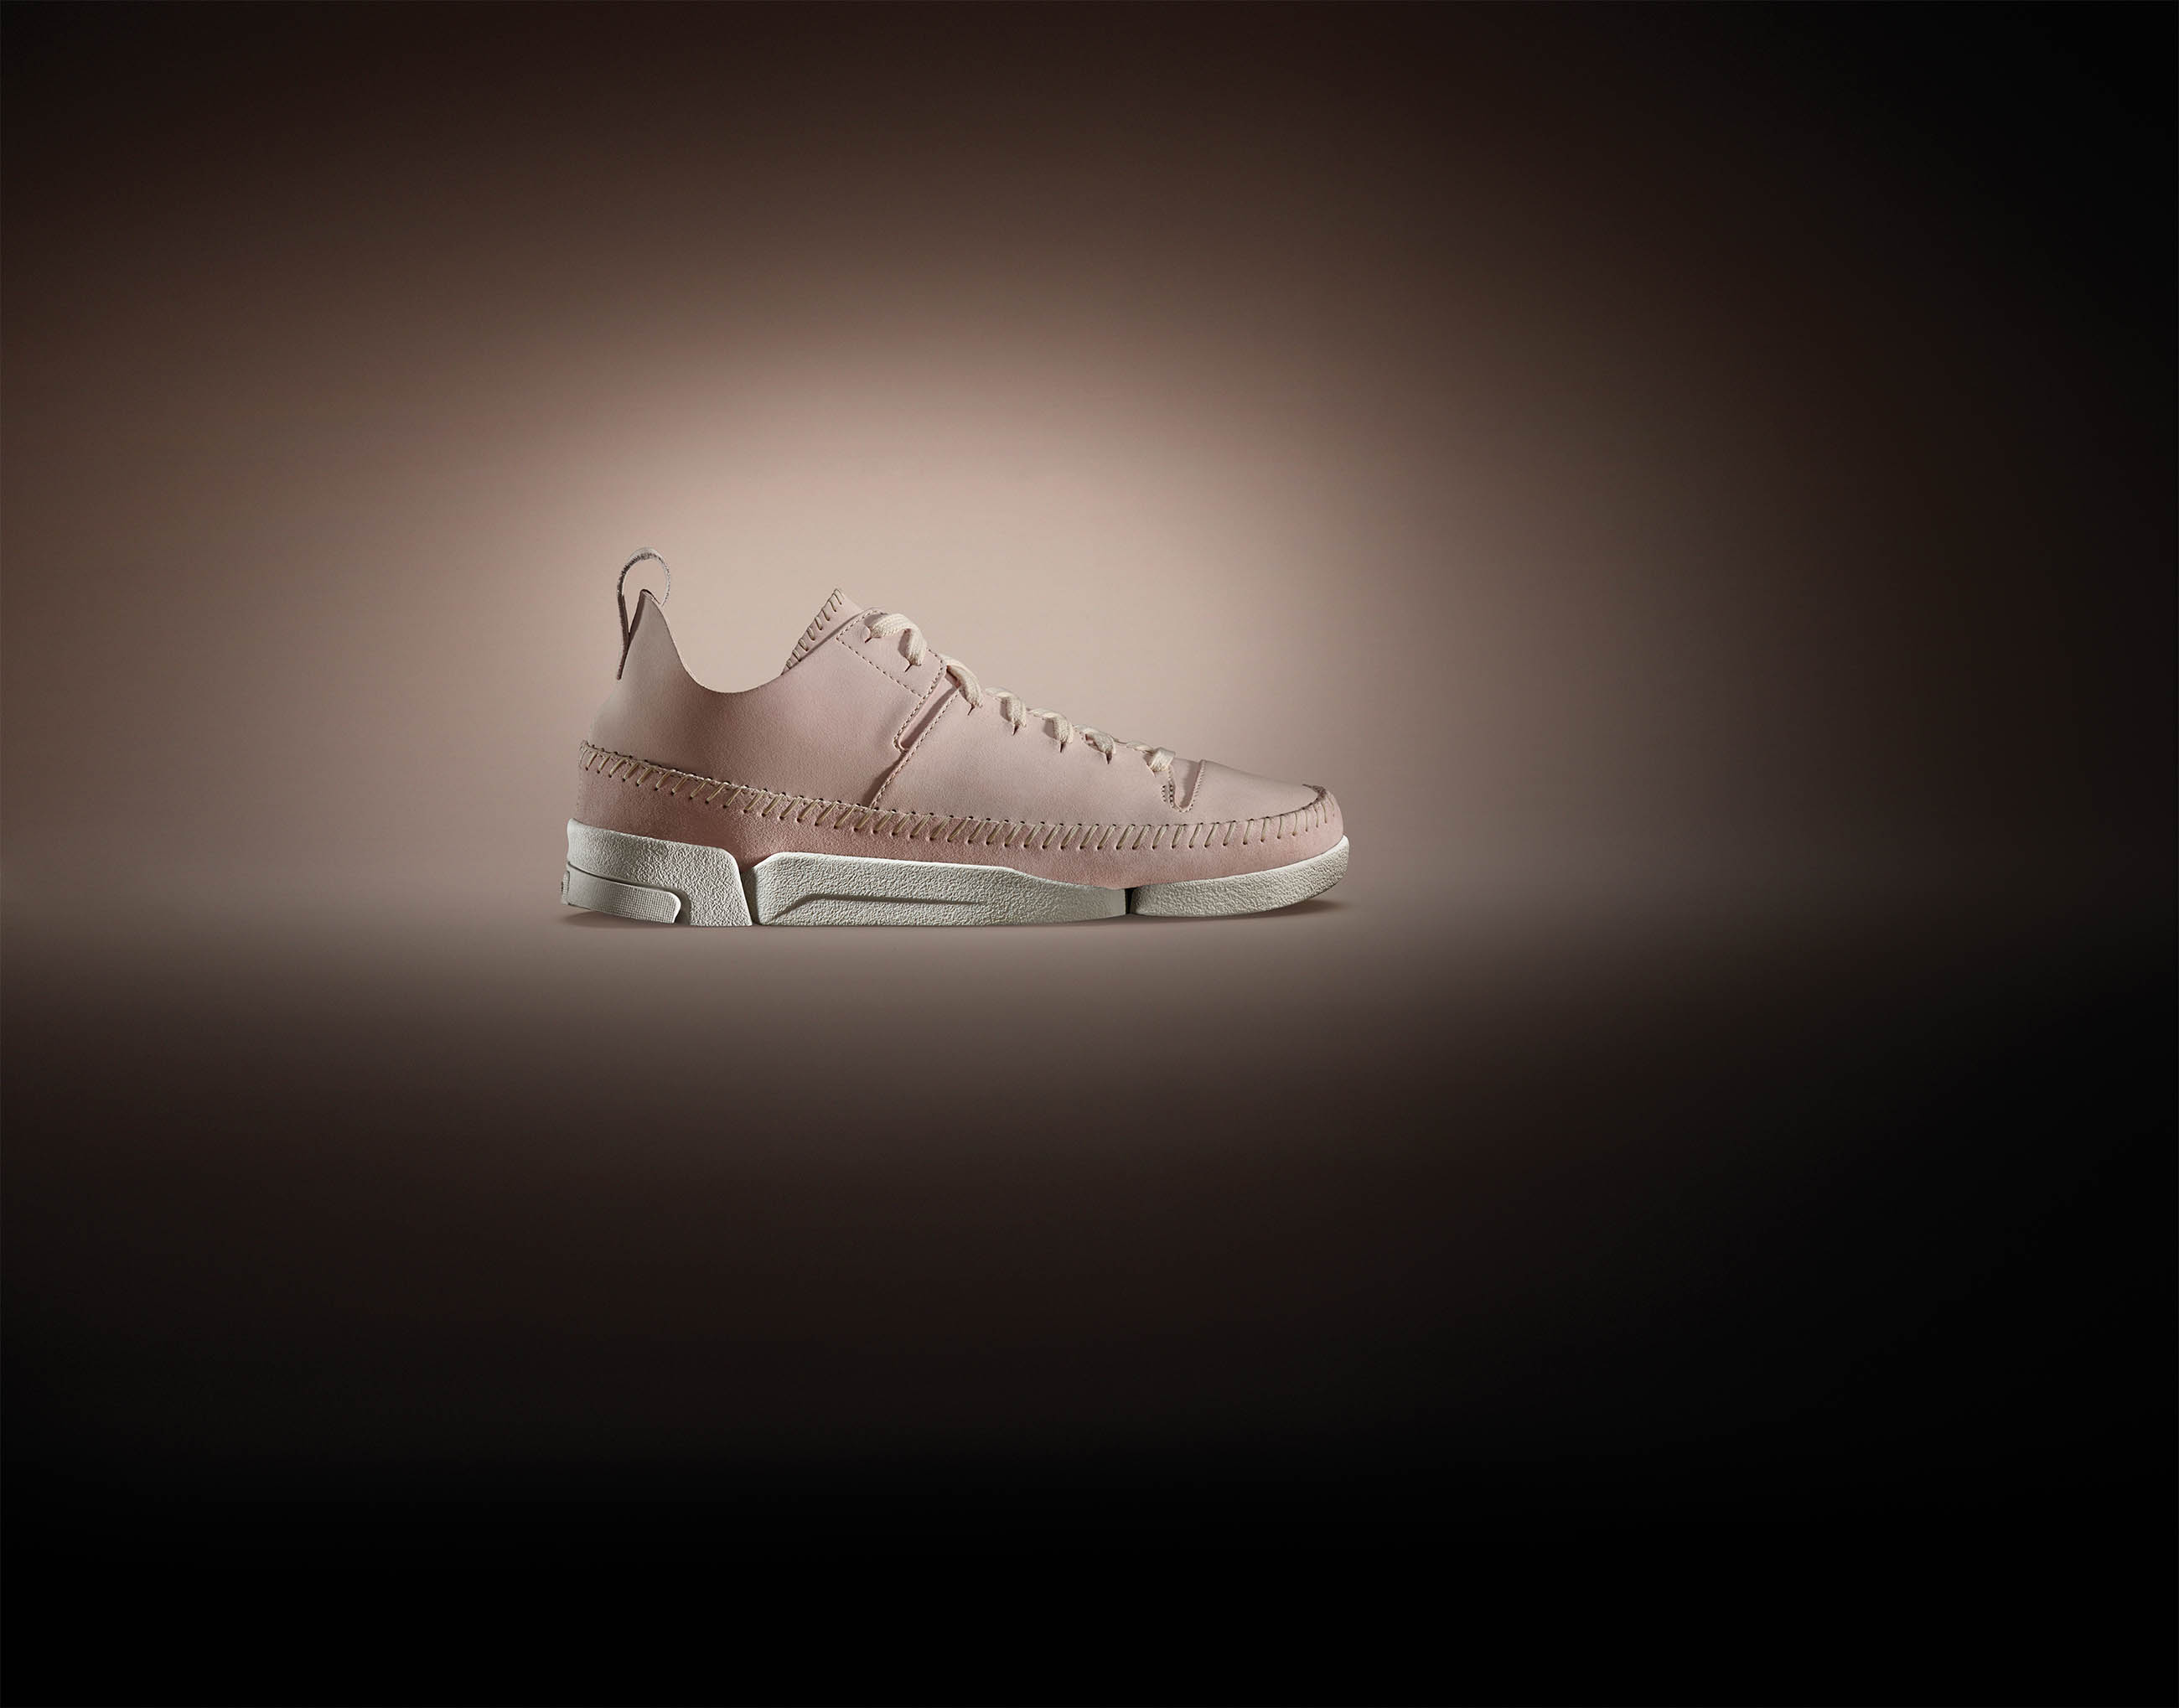 Ampère mijn Ham Clarks Introduces Trigenic, a New Innovation Build with the Same Principles  of Simplicity as Their Iconic Desert Boot